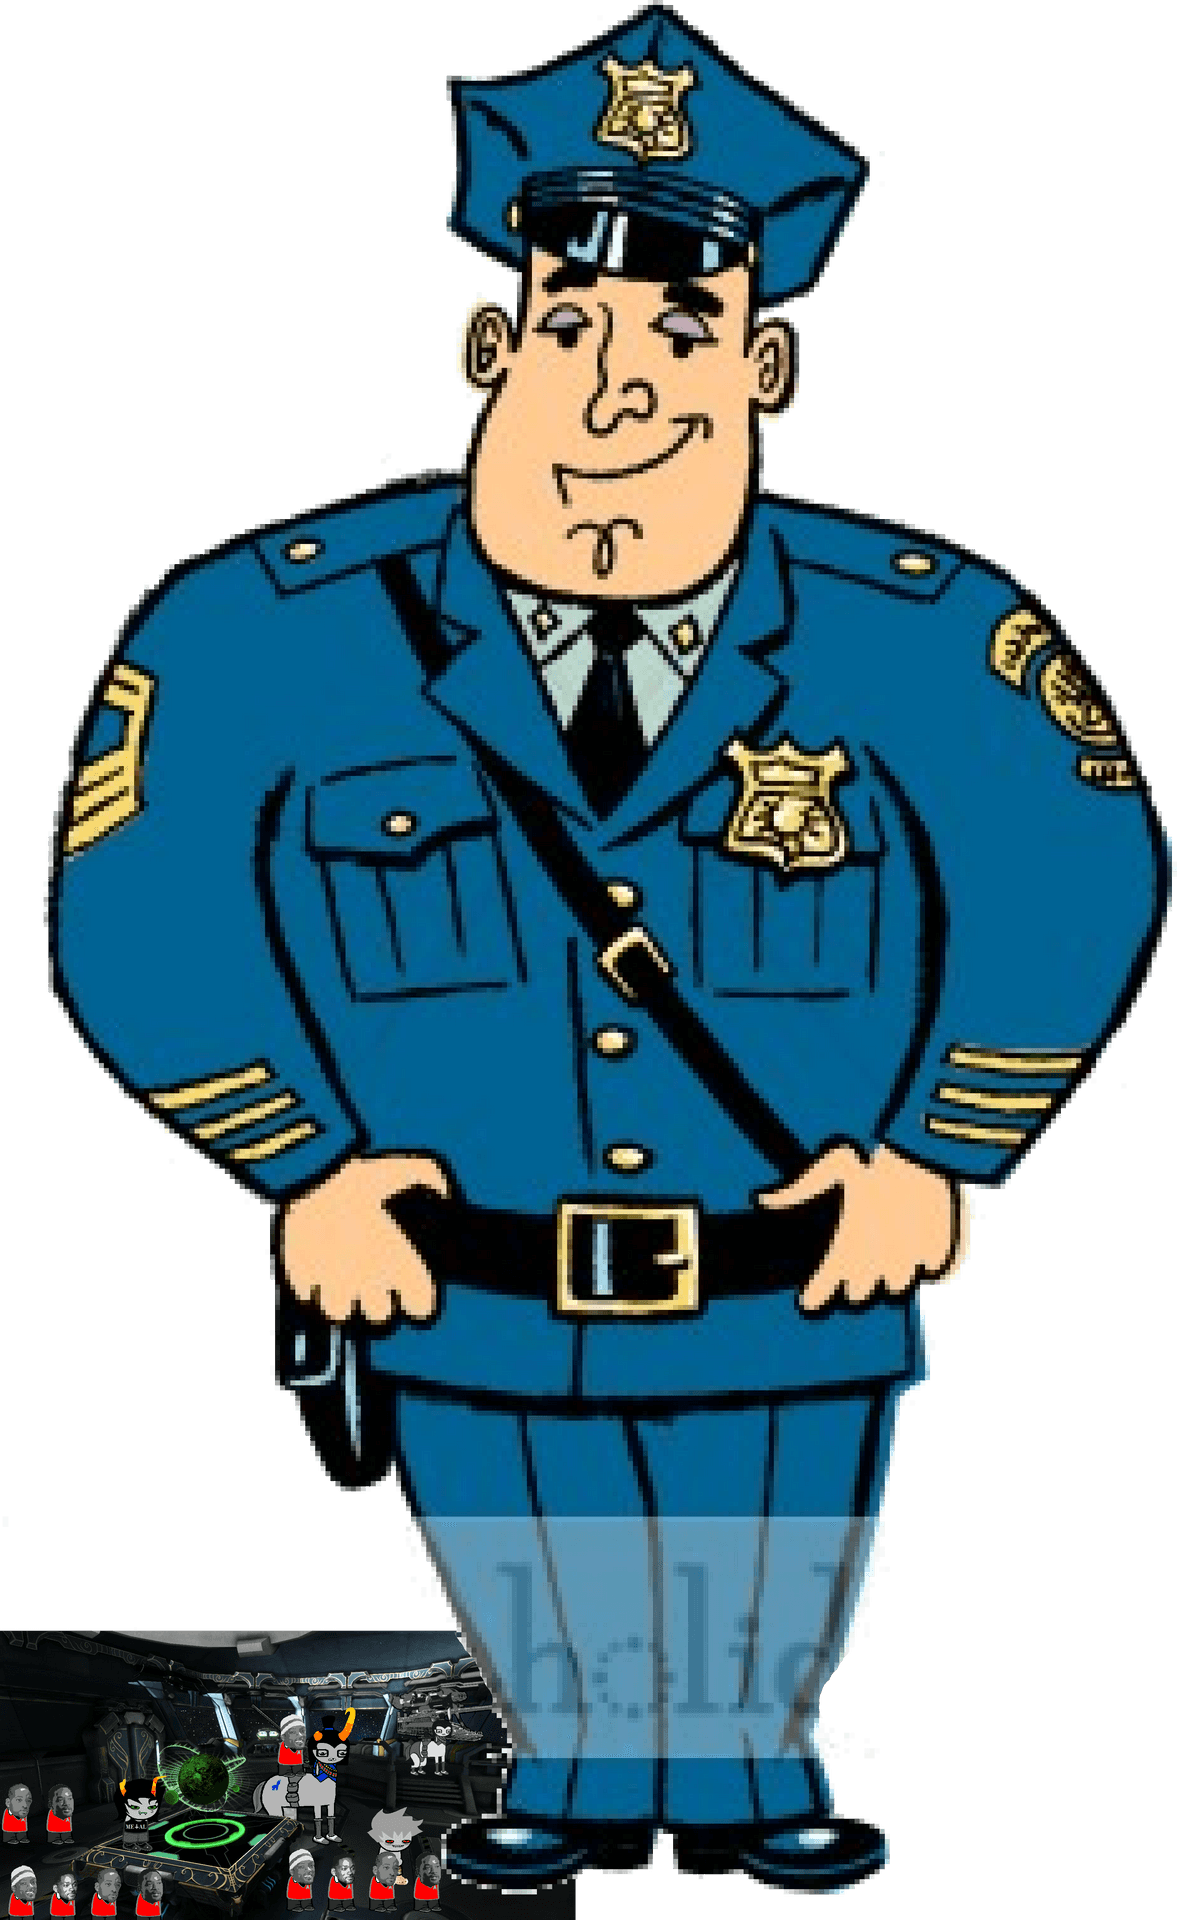 Download Cartoon Police Officer Standing Confidently.png | Wallpapers.com